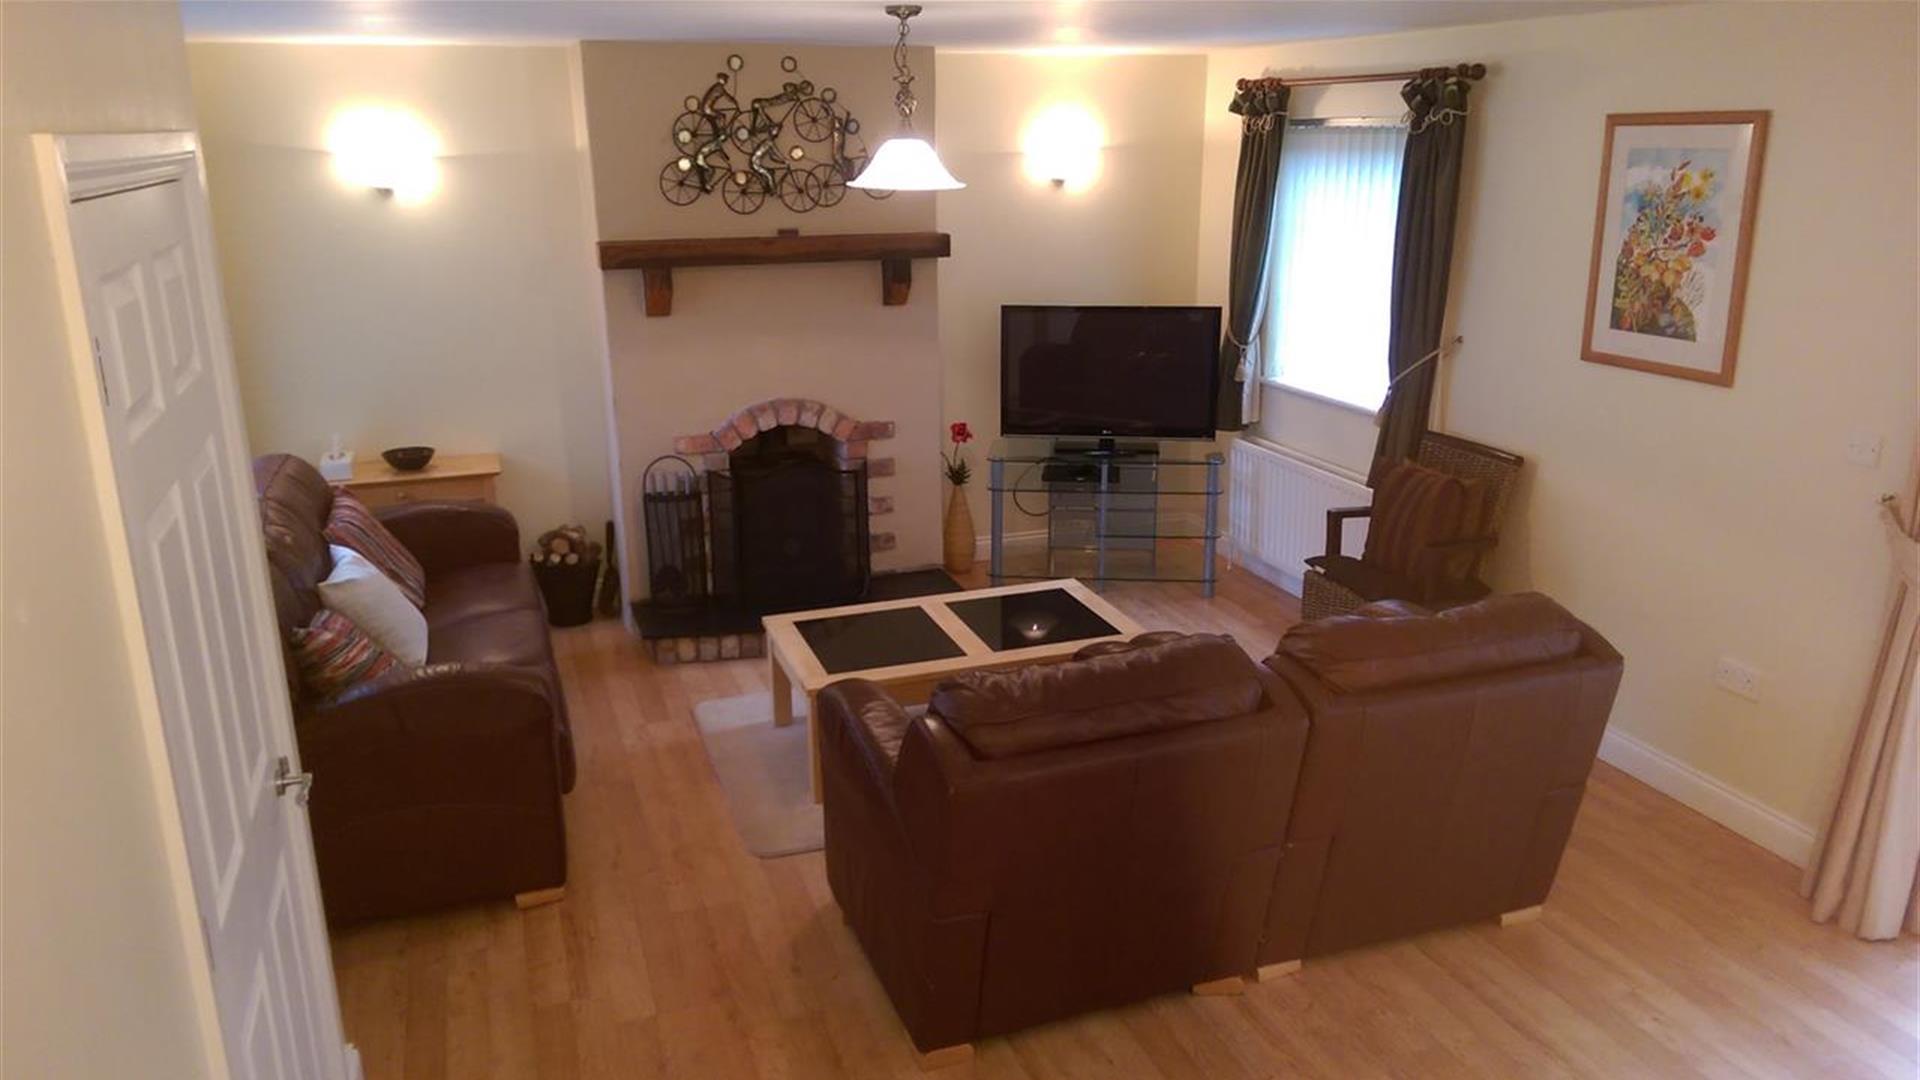 Image shows lounge area with 2 sofas, fireplace and TV